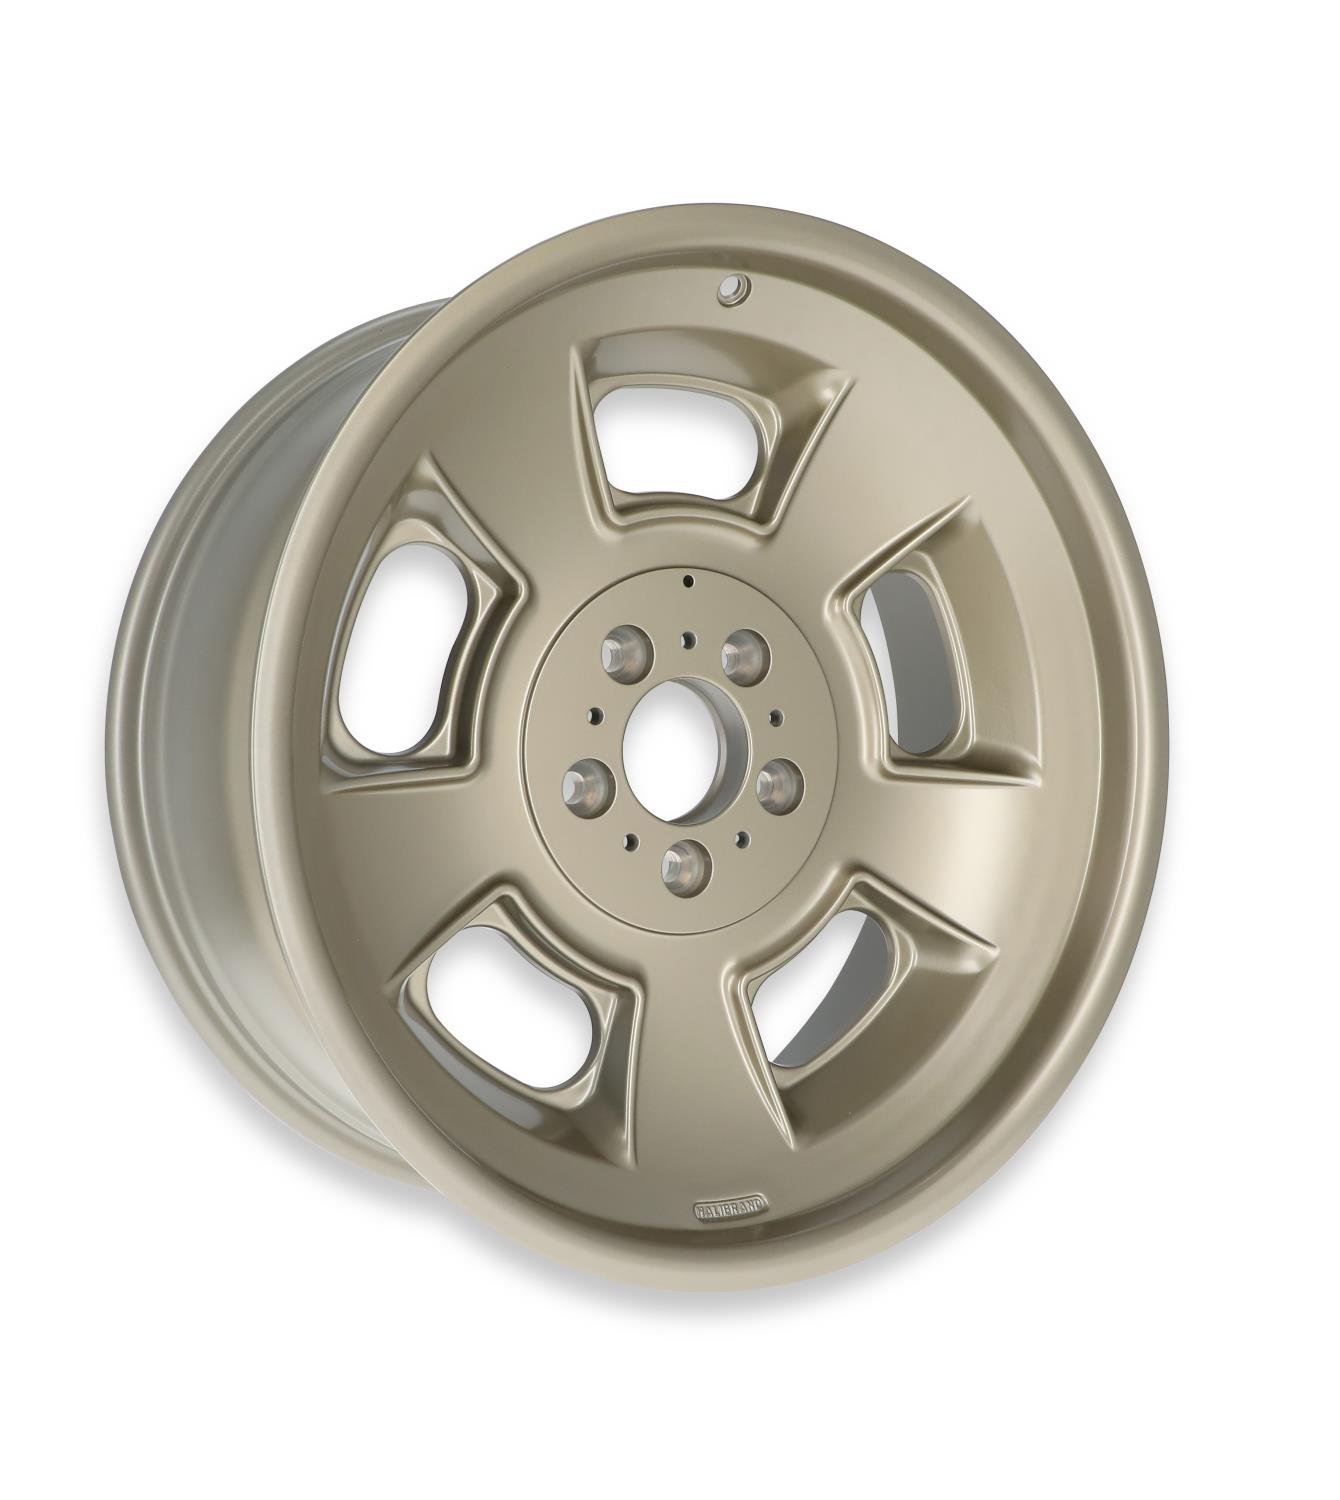 Sprint Front Wheel, Size: 20x8.5", Bolt Pattern: 5x5", Backspace: 4.75" [MAG7 - Semi Gloss Clearcoat]